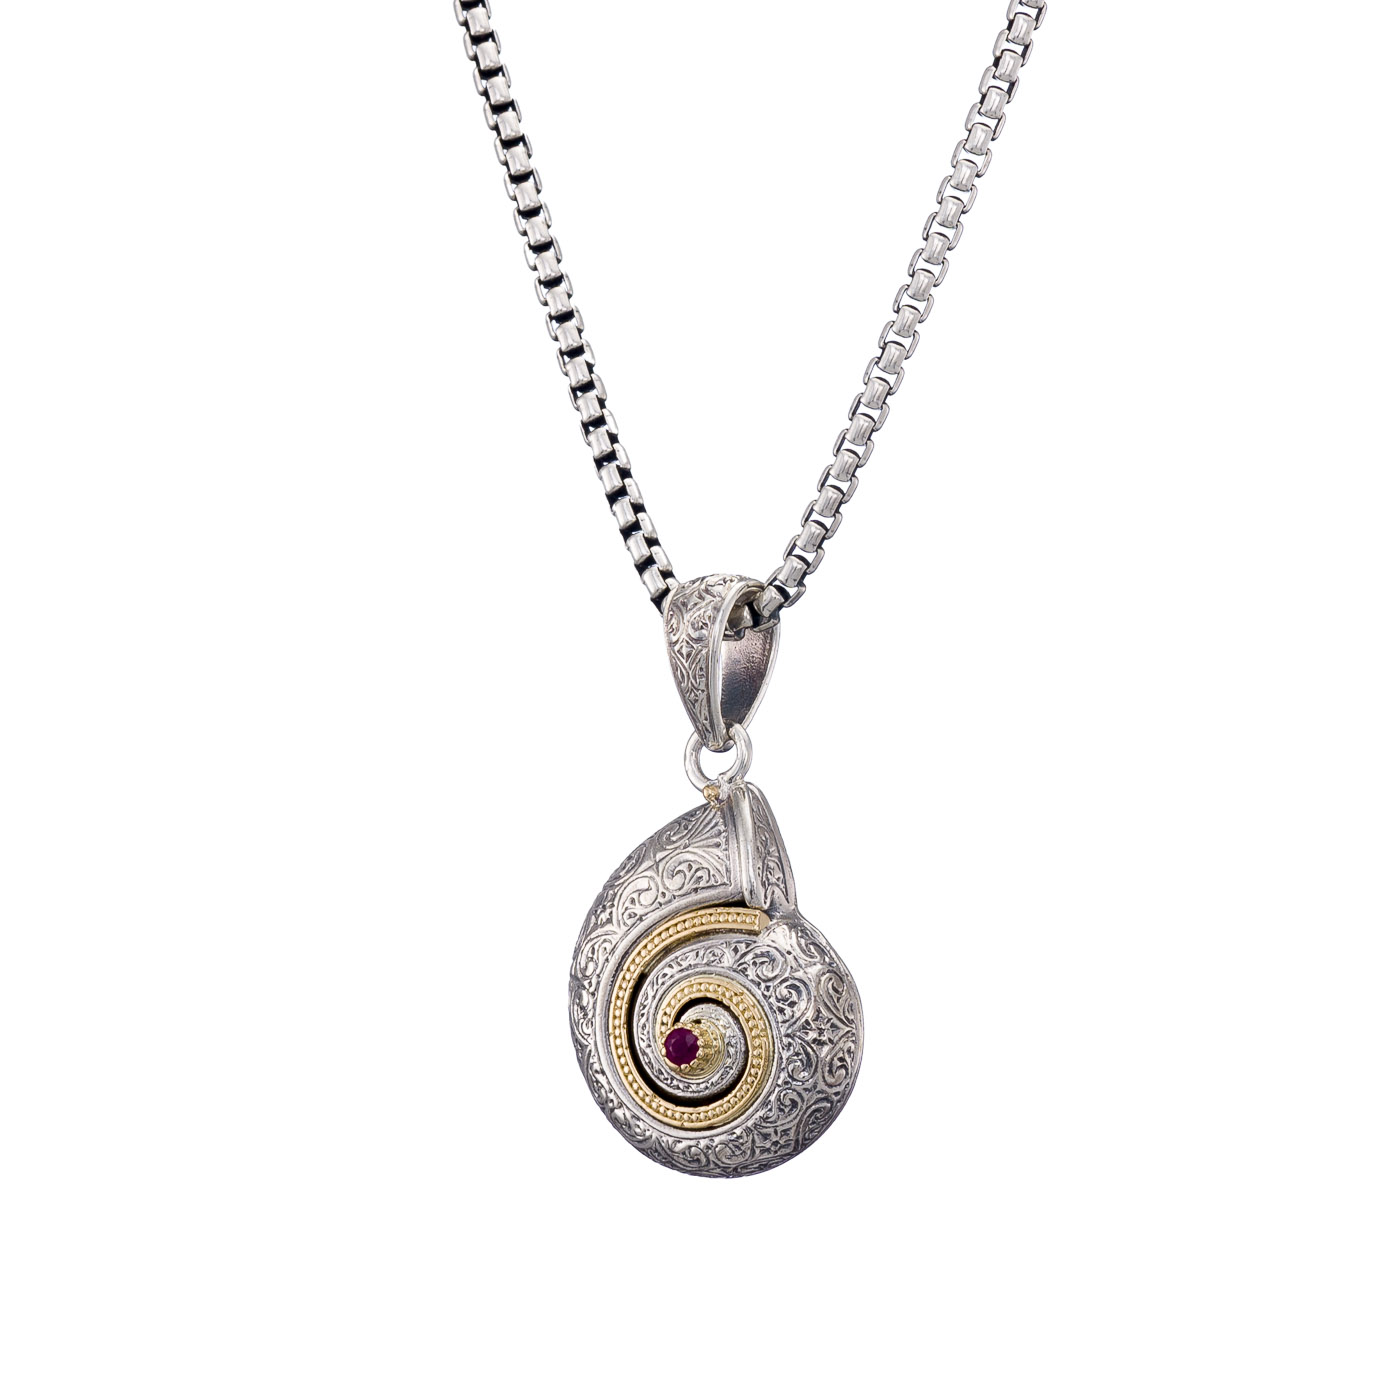 Sea Snail Pendant in 18K Gold and Sterling Silver with Ruby